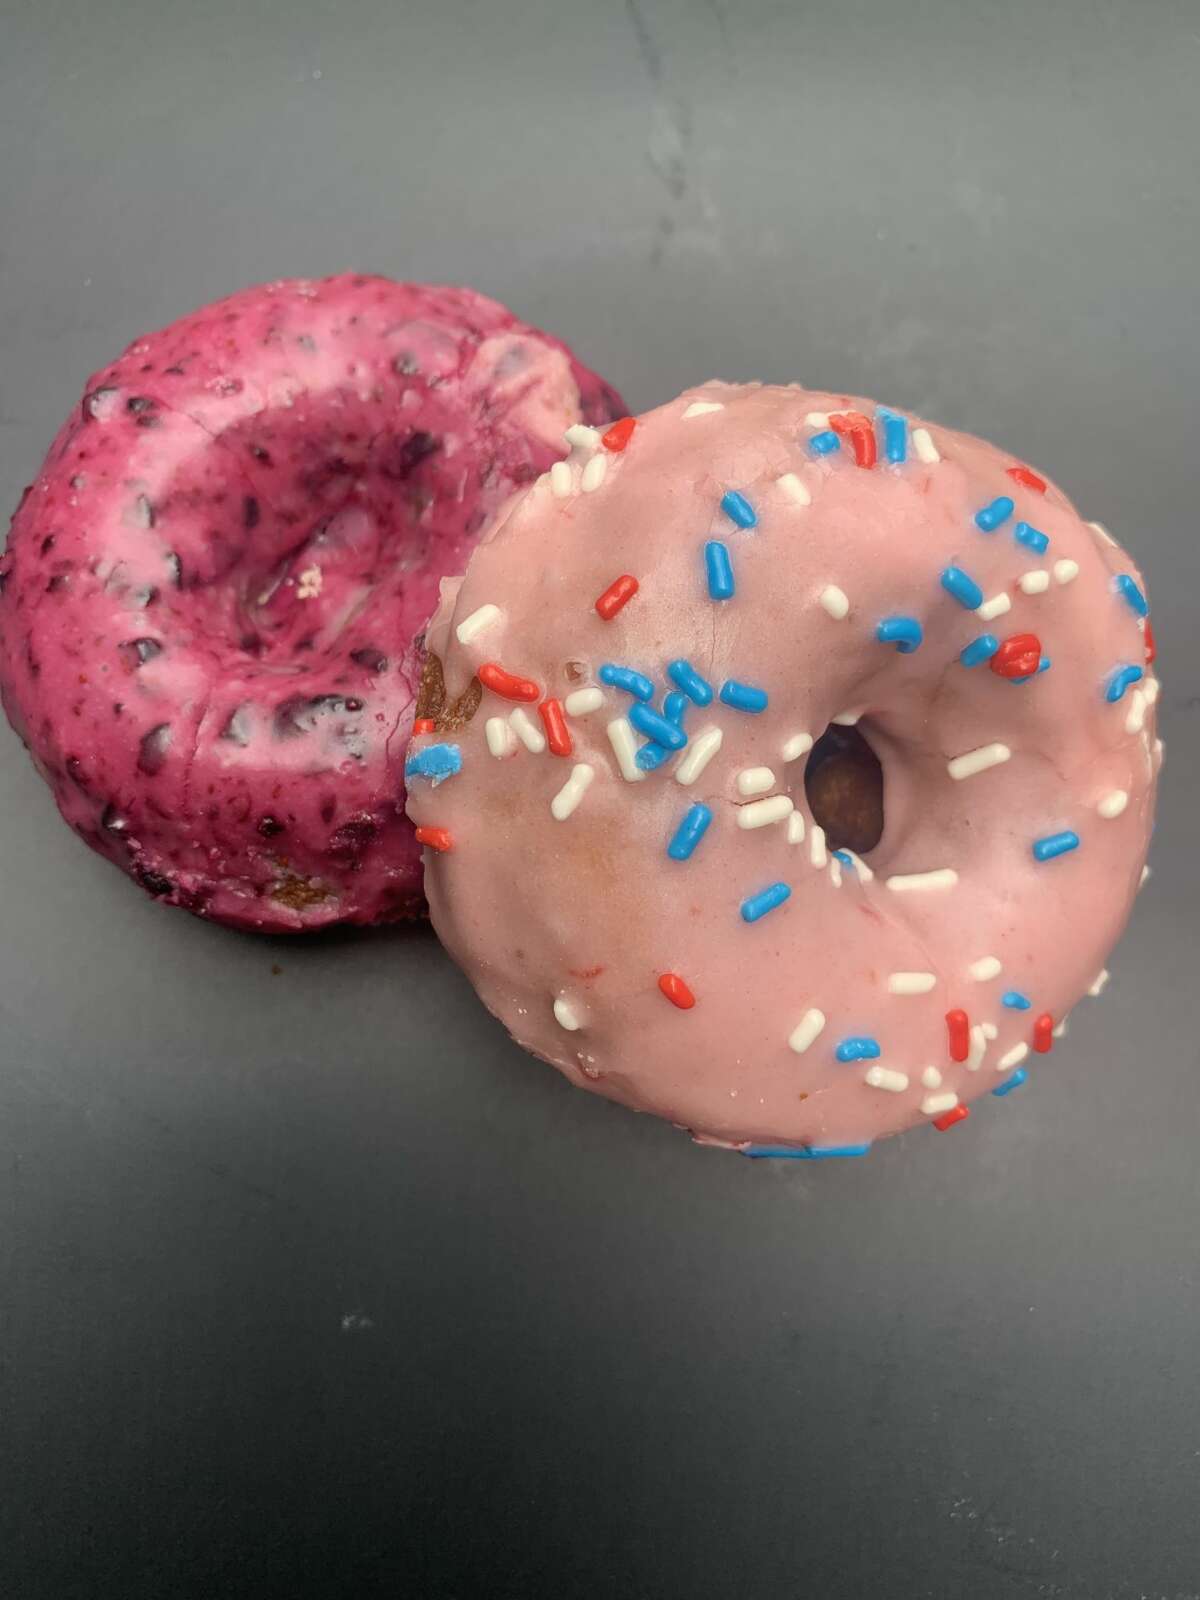 Cider Belly doughnuts come in a variety of flavors, including Maine Blueberry and a strawberry sprinkle.